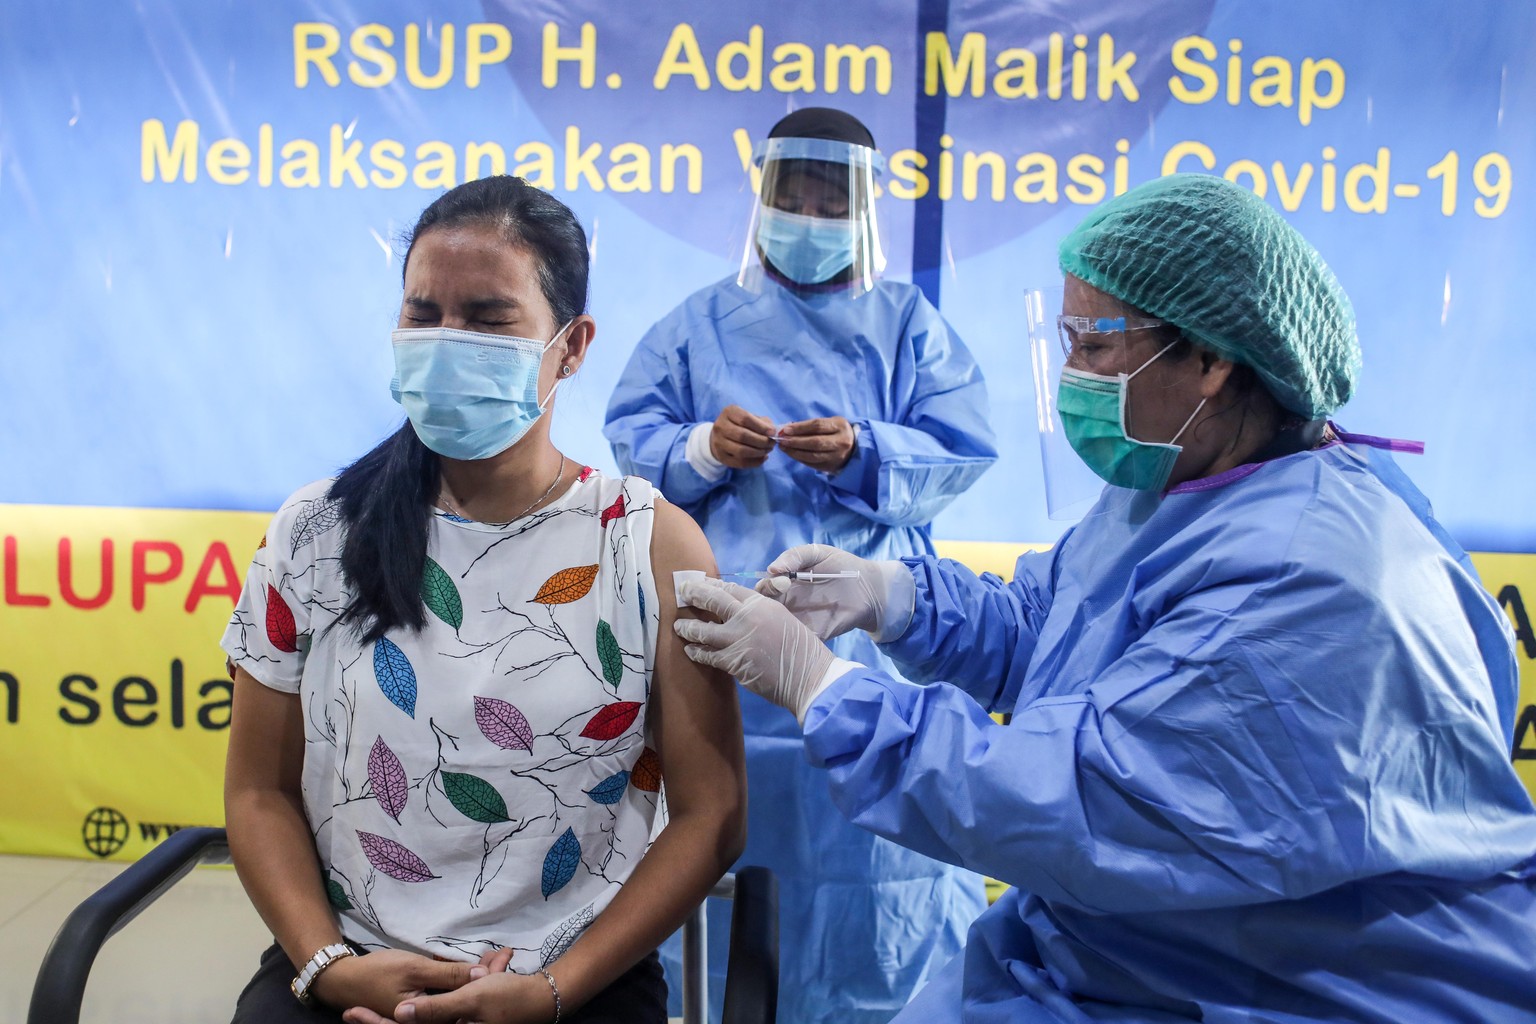 epa08947723 An Indonesian healthcare worker injects a dose of the COVID-19 vaccine during a vaccination drive at a hospital in Medan, North Sumatra, Indonesia, 19 January 2021. Indonesia started the C ...